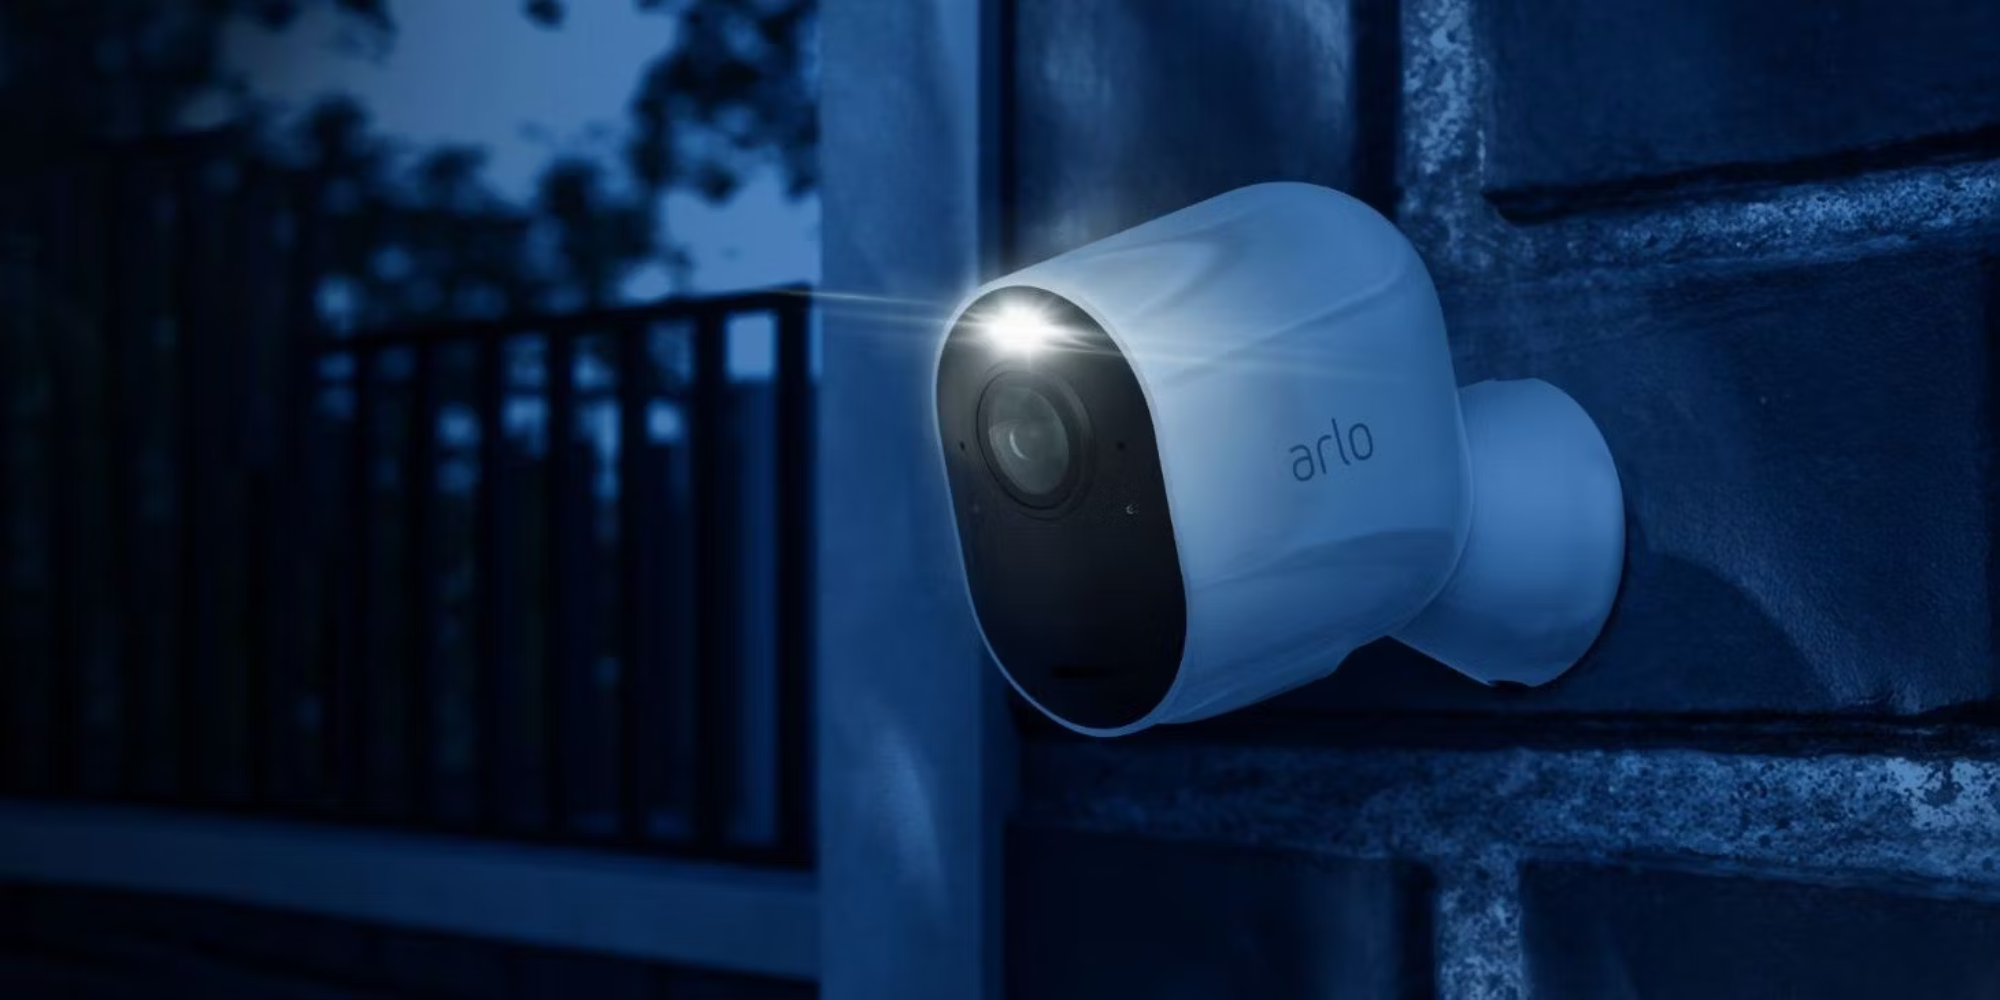 Arlo security camera mounted outside a home at night